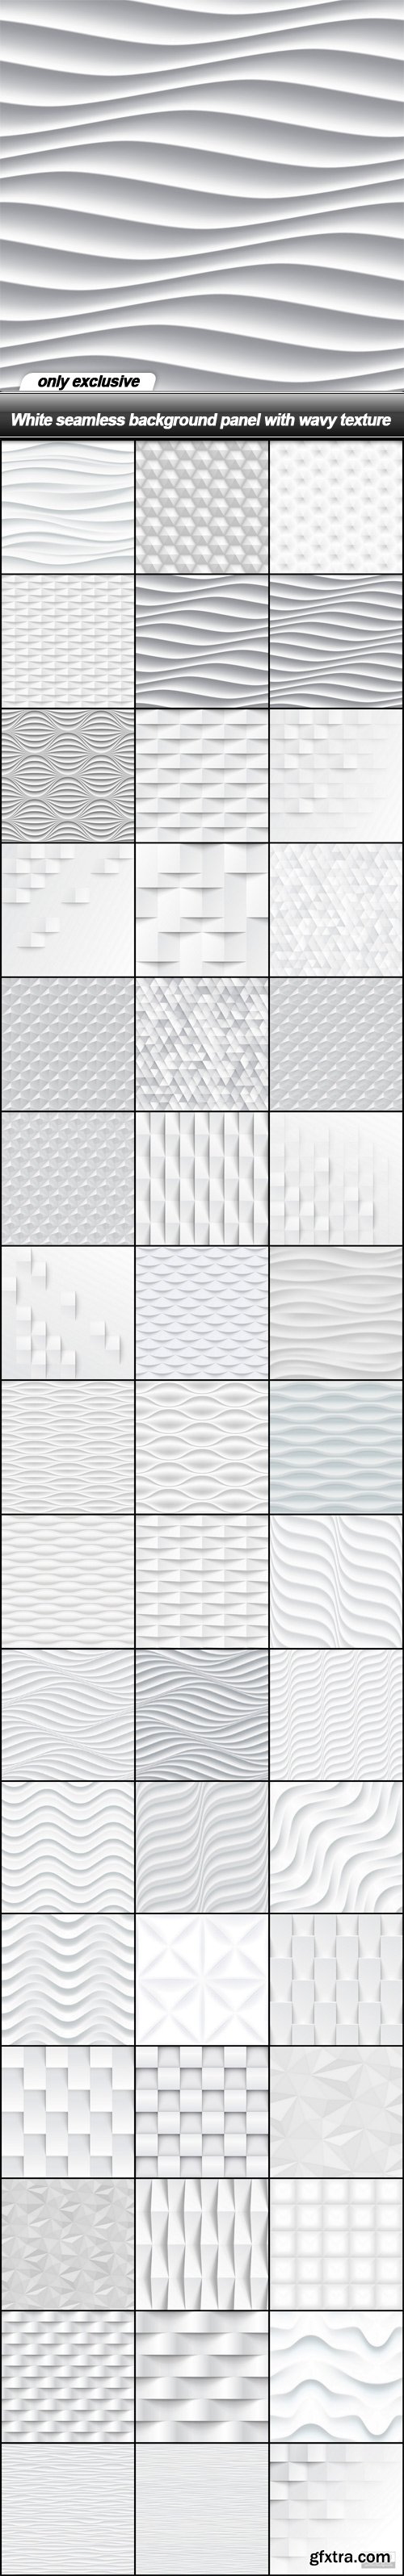 White seamless background panel with wavy texture - 48 EPS